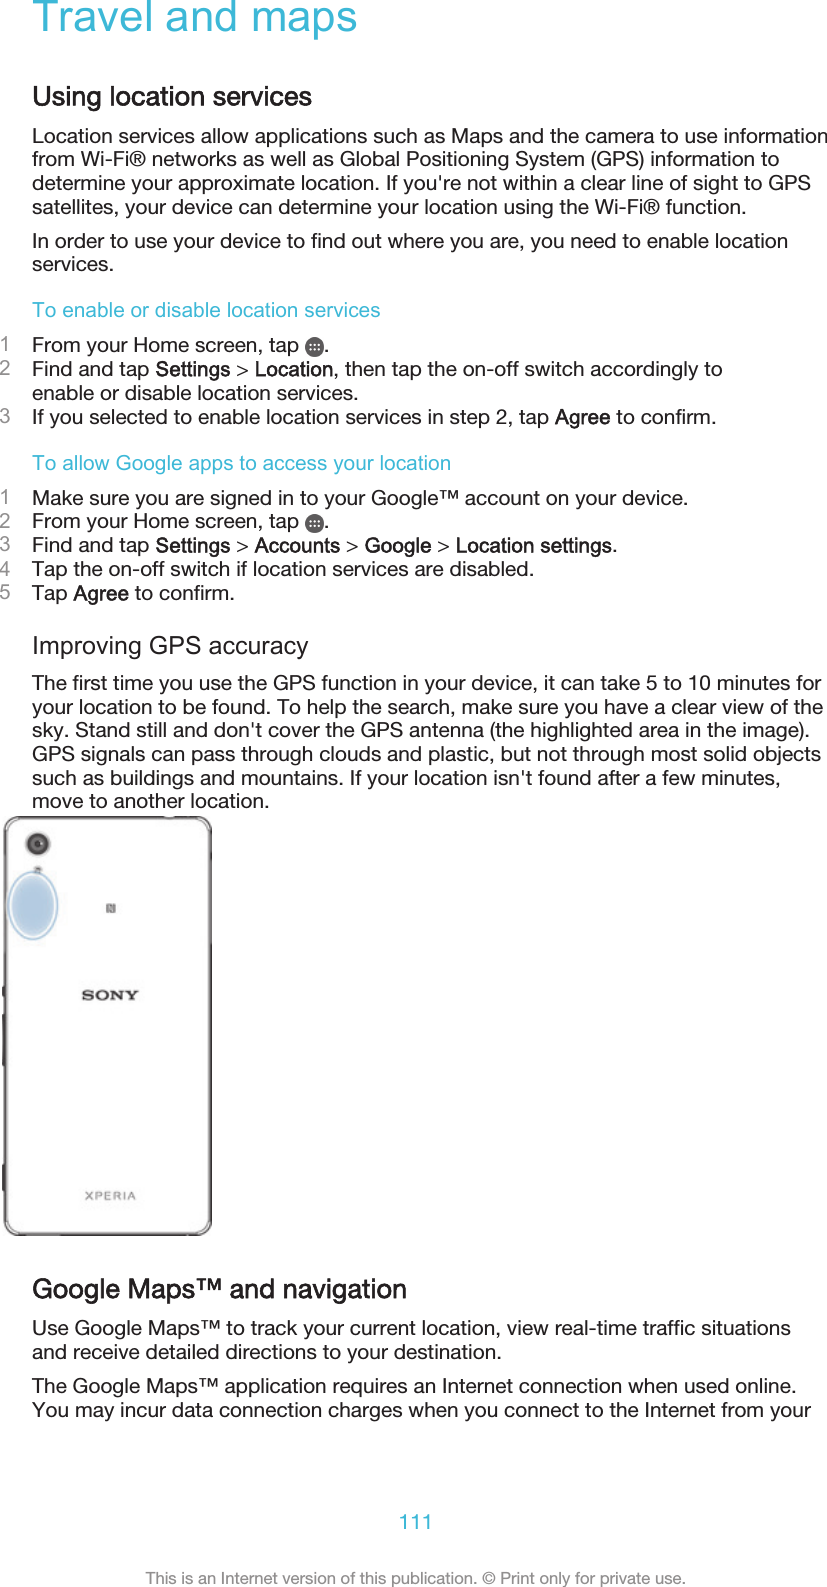 Travel and mapsUsing location servicesLocation services allow applications such as Maps and the camera to use informationfrom Wi-Fi® networks as well as Global Positioning System (GPS) information todetermine your approximate location. If you&apos;re not within a clear line of sight to GPSsatellites, your device can determine your location using the Wi-Fi® function.In order to use your device to find out where you are, you need to enable locationservices.To enable or disable location services1From your Home screen, tap  .2Find and tap Settings &gt; Location, then tap the on-off switch accordingly toenable or disable location services.3If you selected to enable location services in step 2, tap Agree to confirm.To allow Google apps to access your location1Make sure you are signed in to your Google™ account on your device.2From your Home screen, tap  .3Find and tap Settings &gt; Accounts &gt; Google &gt; Location settings.4Tap the on-off switch if location services are disabled.5Tap Agree to confirm.Improving GPS accuracyThe first time you use the GPS function in your device, it can take 5 to 10 minutes foryour location to be found. To help the search, make sure you have a clear view of thesky. Stand still and don&apos;t cover the GPS antenna (the highlighted area in the image).GPS signals can pass through clouds and plastic, but not through most solid objectssuch as buildings and mountains. If your location isn&apos;t found after a few minutes,move to another location.Google Maps™ and navigationUse Google Maps™ to track your current location, view real-time traffic situationsand receive detailed directions to your destination.The Google Maps™ application requires an Internet connection when used online.You may incur data connection charges when you connect to the Internet from your111This is an Internet version of this publication. © Print only for private use.